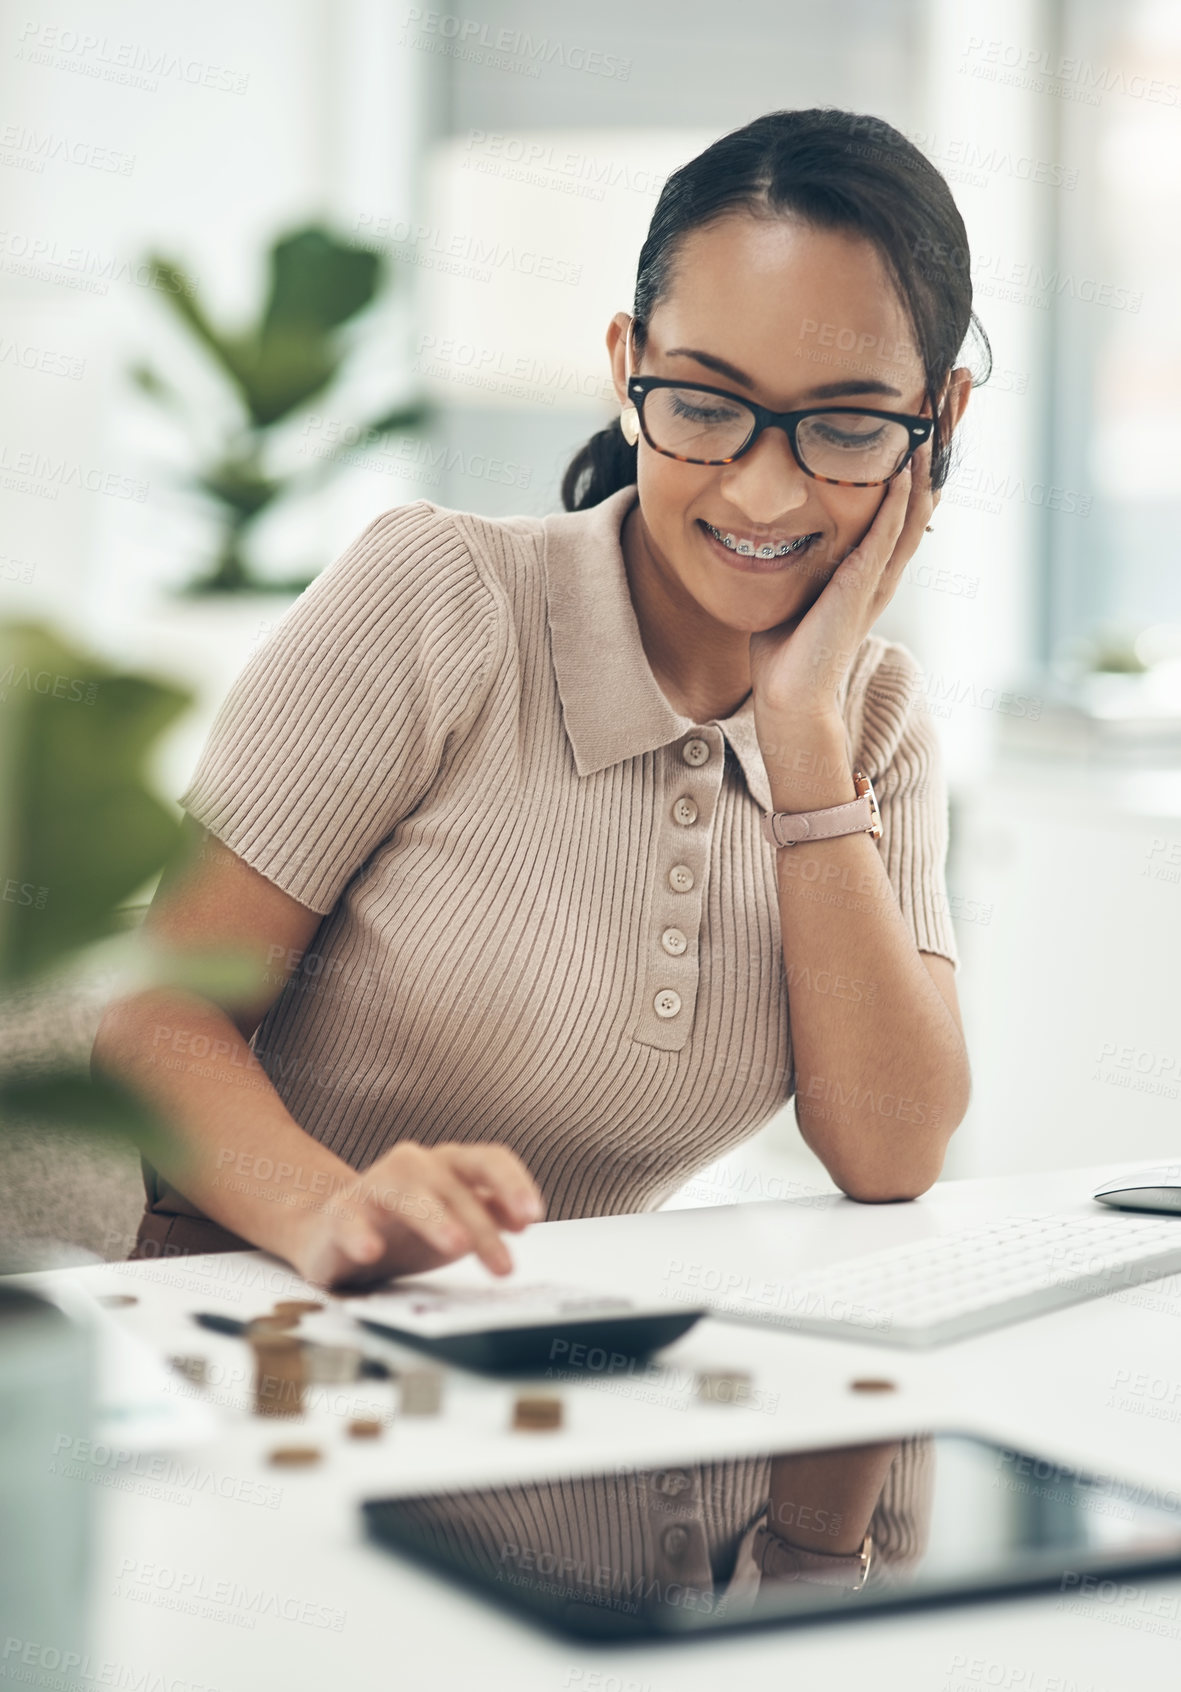 Buy stock photo Shot of a young businesswoman calculating finances in an office